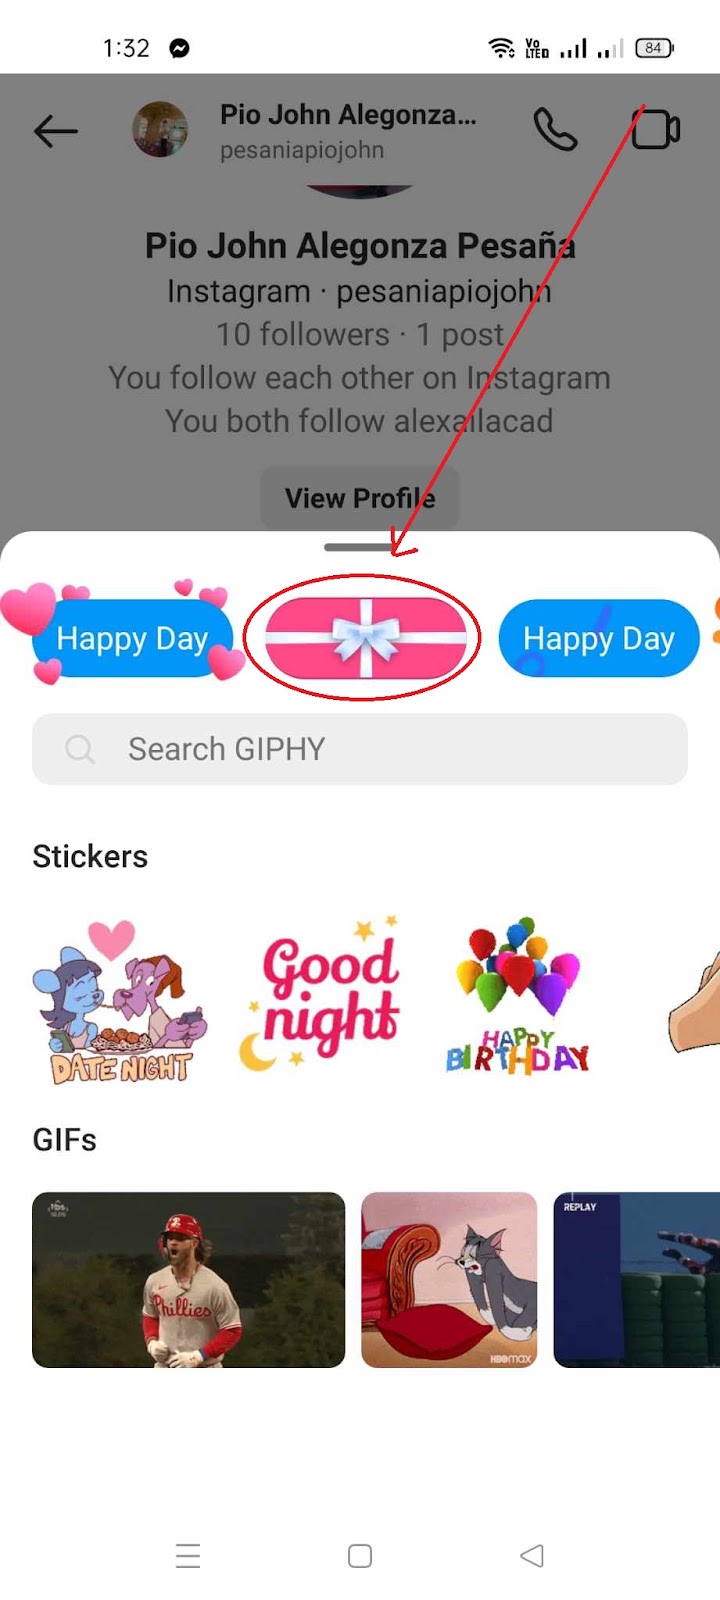 How to Send GIft Messages on Instagram - Choose Gift Message